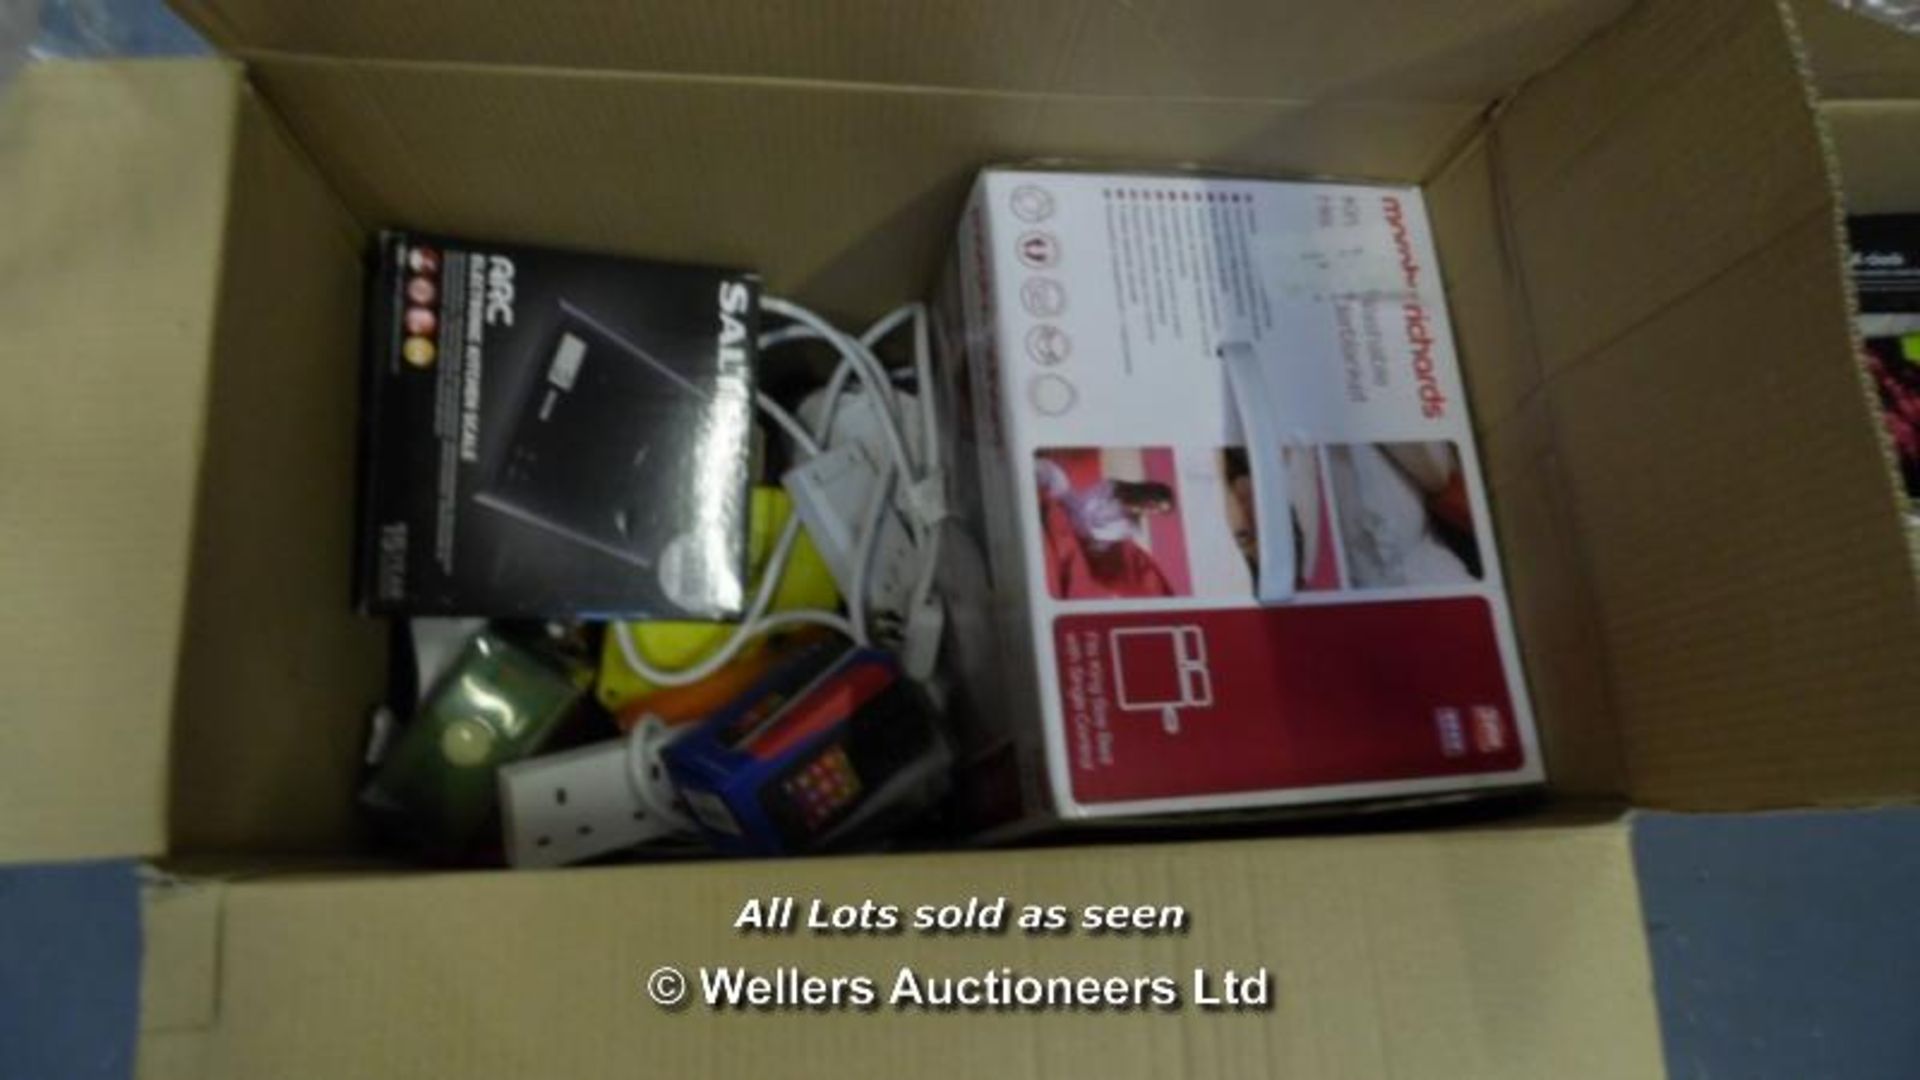 *1X MIXED PALLET OF APPROX 40X  BEYOND ECONOMICAL REPAIR HOUSEHOLD,TOYS AND MIXED ELECTRICAL ITEMS - Image 3 of 4